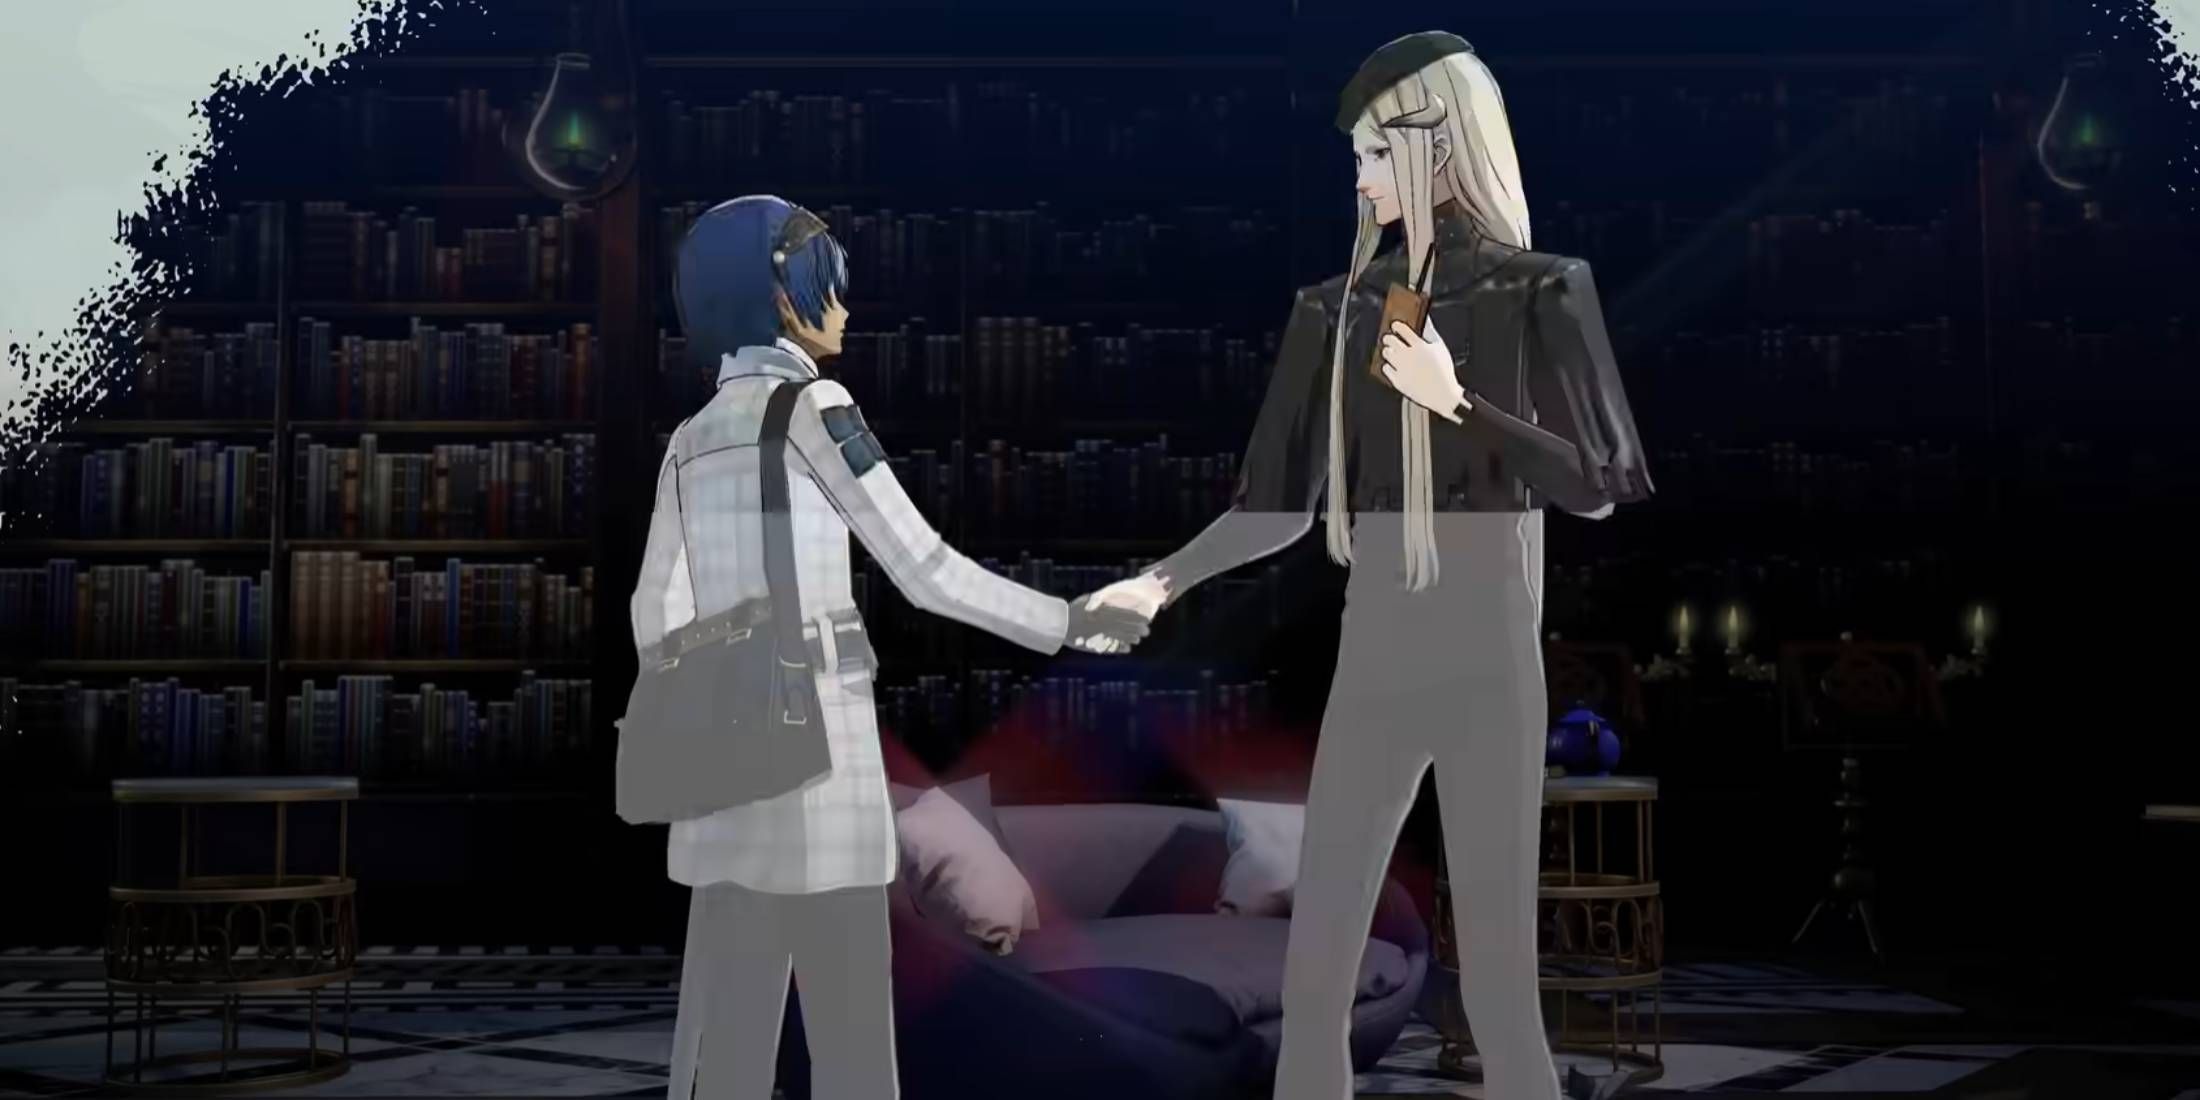 The protagonist shaking hands with another character in Metaphor: ReFantazio